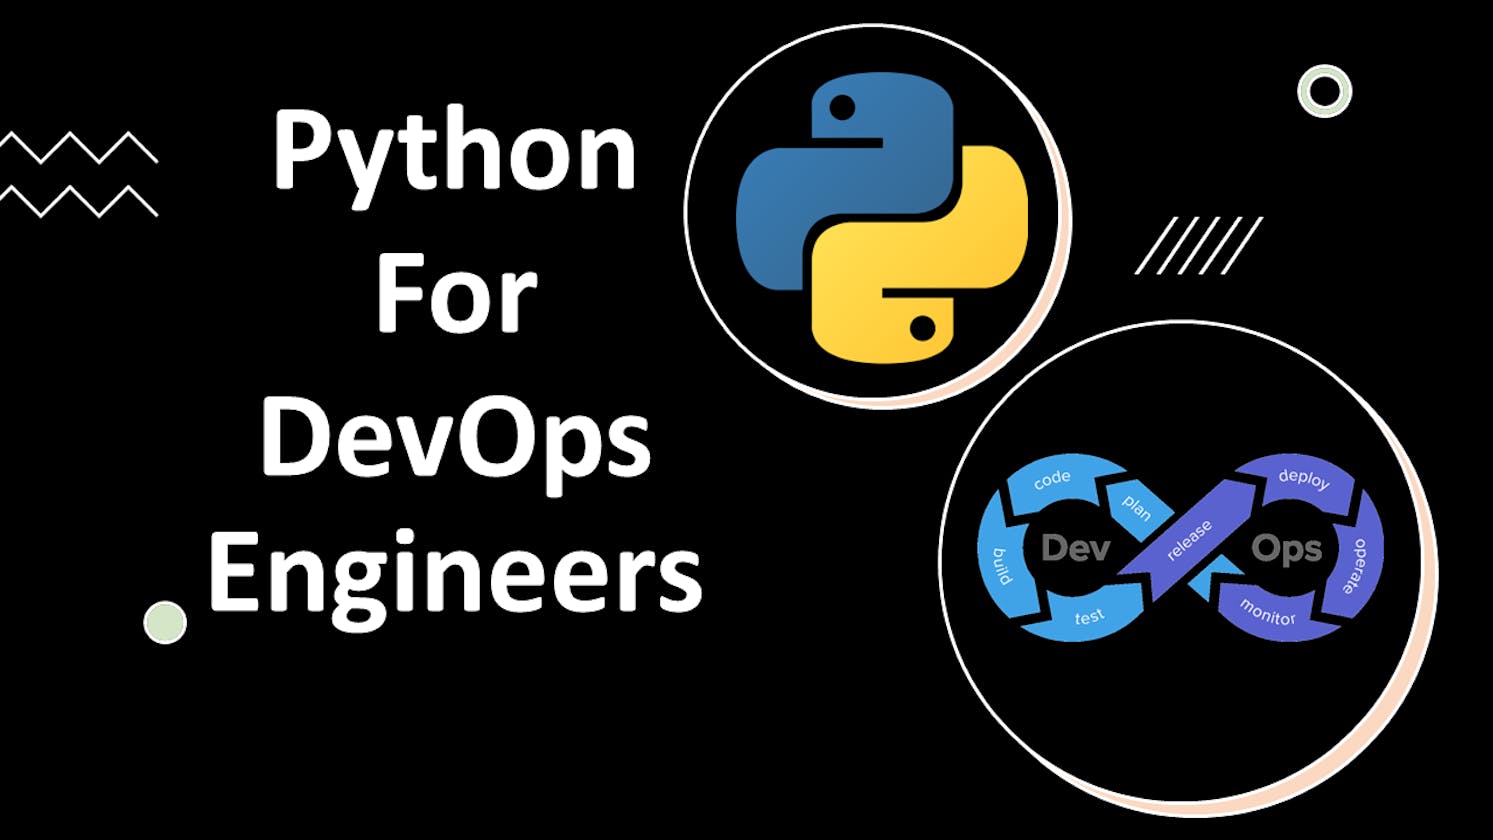 Python Data types and Data structures for DevOps Engineers.